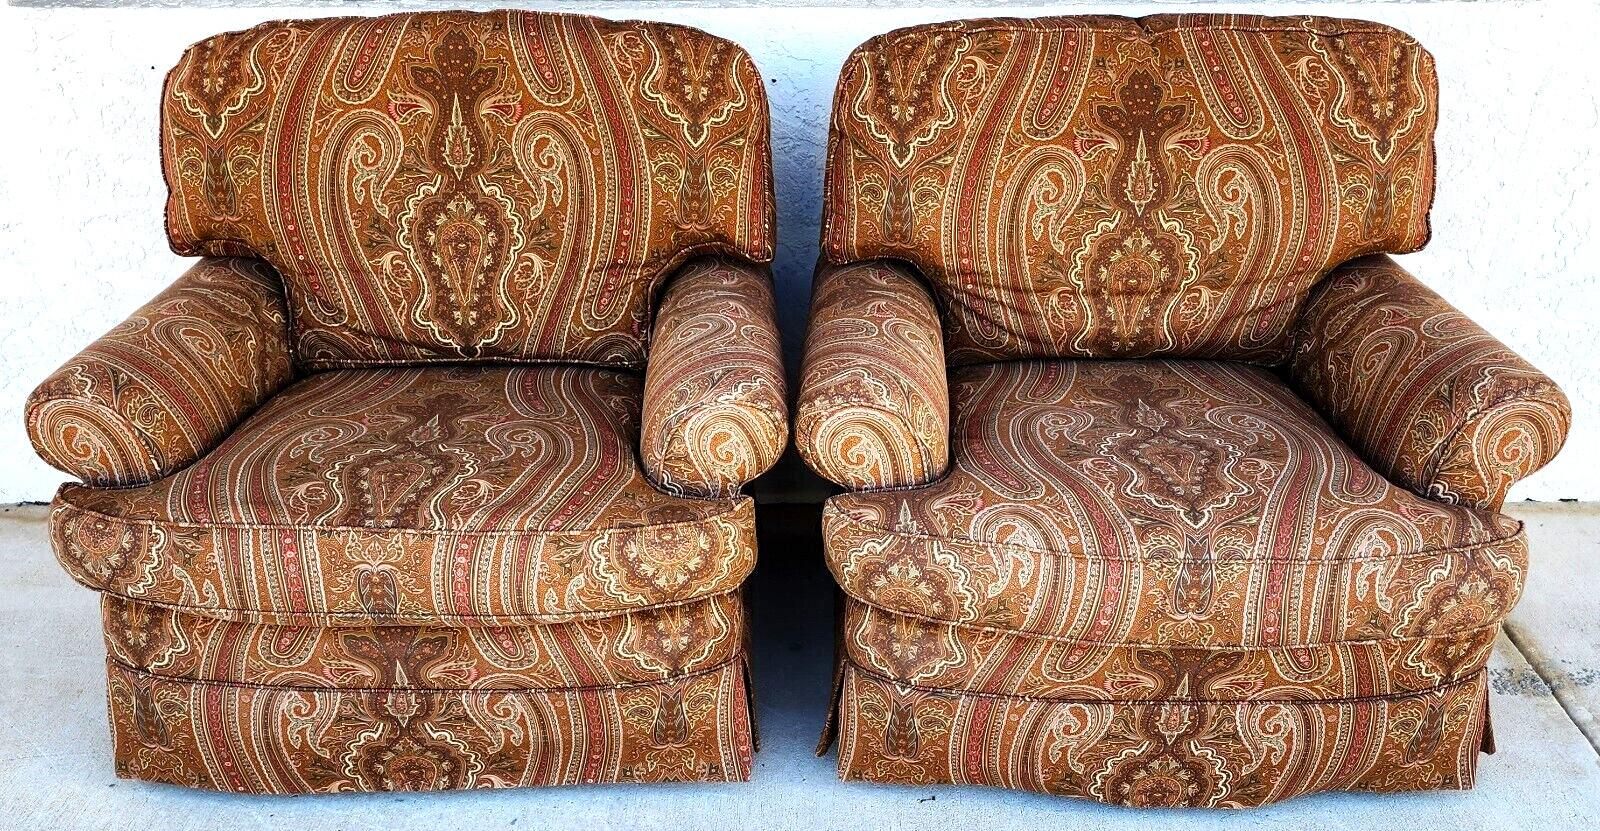 Offering one of our recent palm beach estate fine furniture acquisitions of a
Set of 2 Ralph Lauren upholstered club lounge chairs
Great chairs with 2 matching throw pillows included and as shown.

Approximate measurements in inches
33